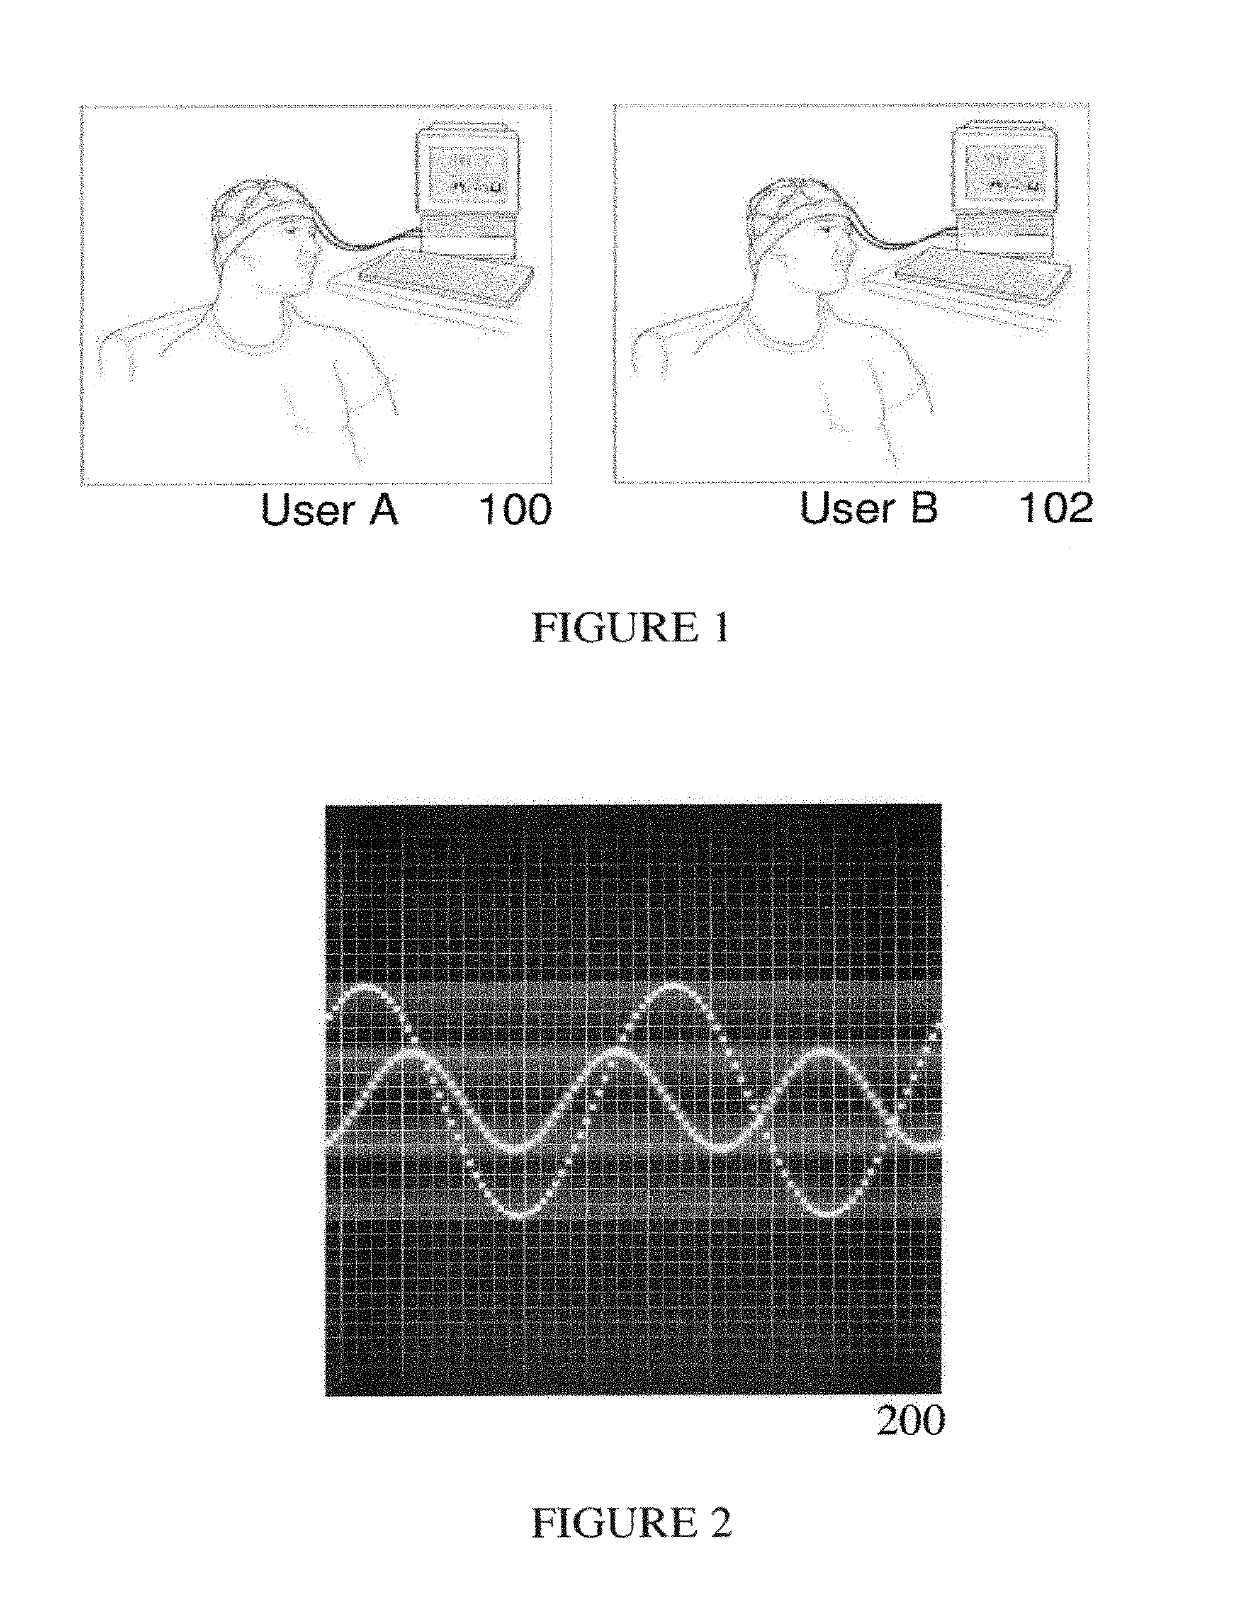 Method for assessing interpersonal rapport and compatibility using brain waves